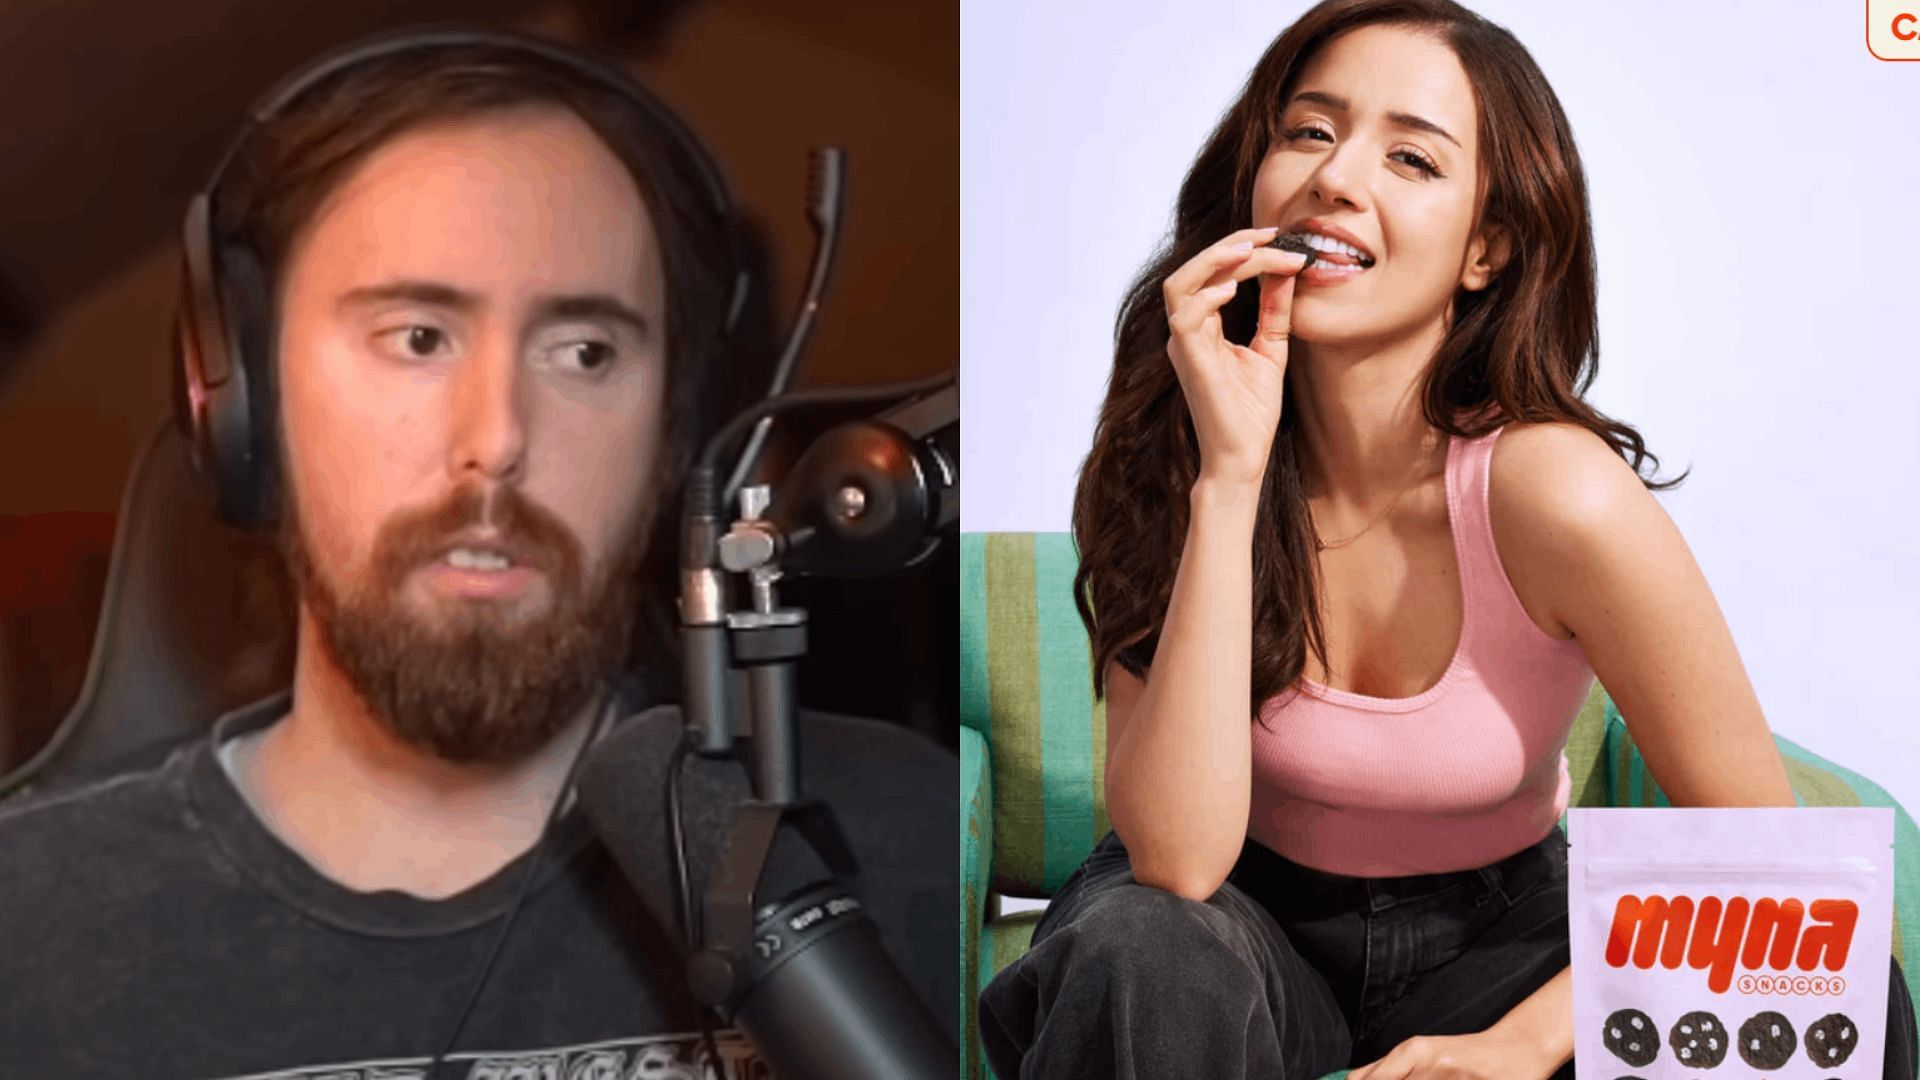 Zack called Imane &quot;out of touch&quot; for her response to critics. (Image via Asmongold Clips/YouTube and mynasnacks.com)